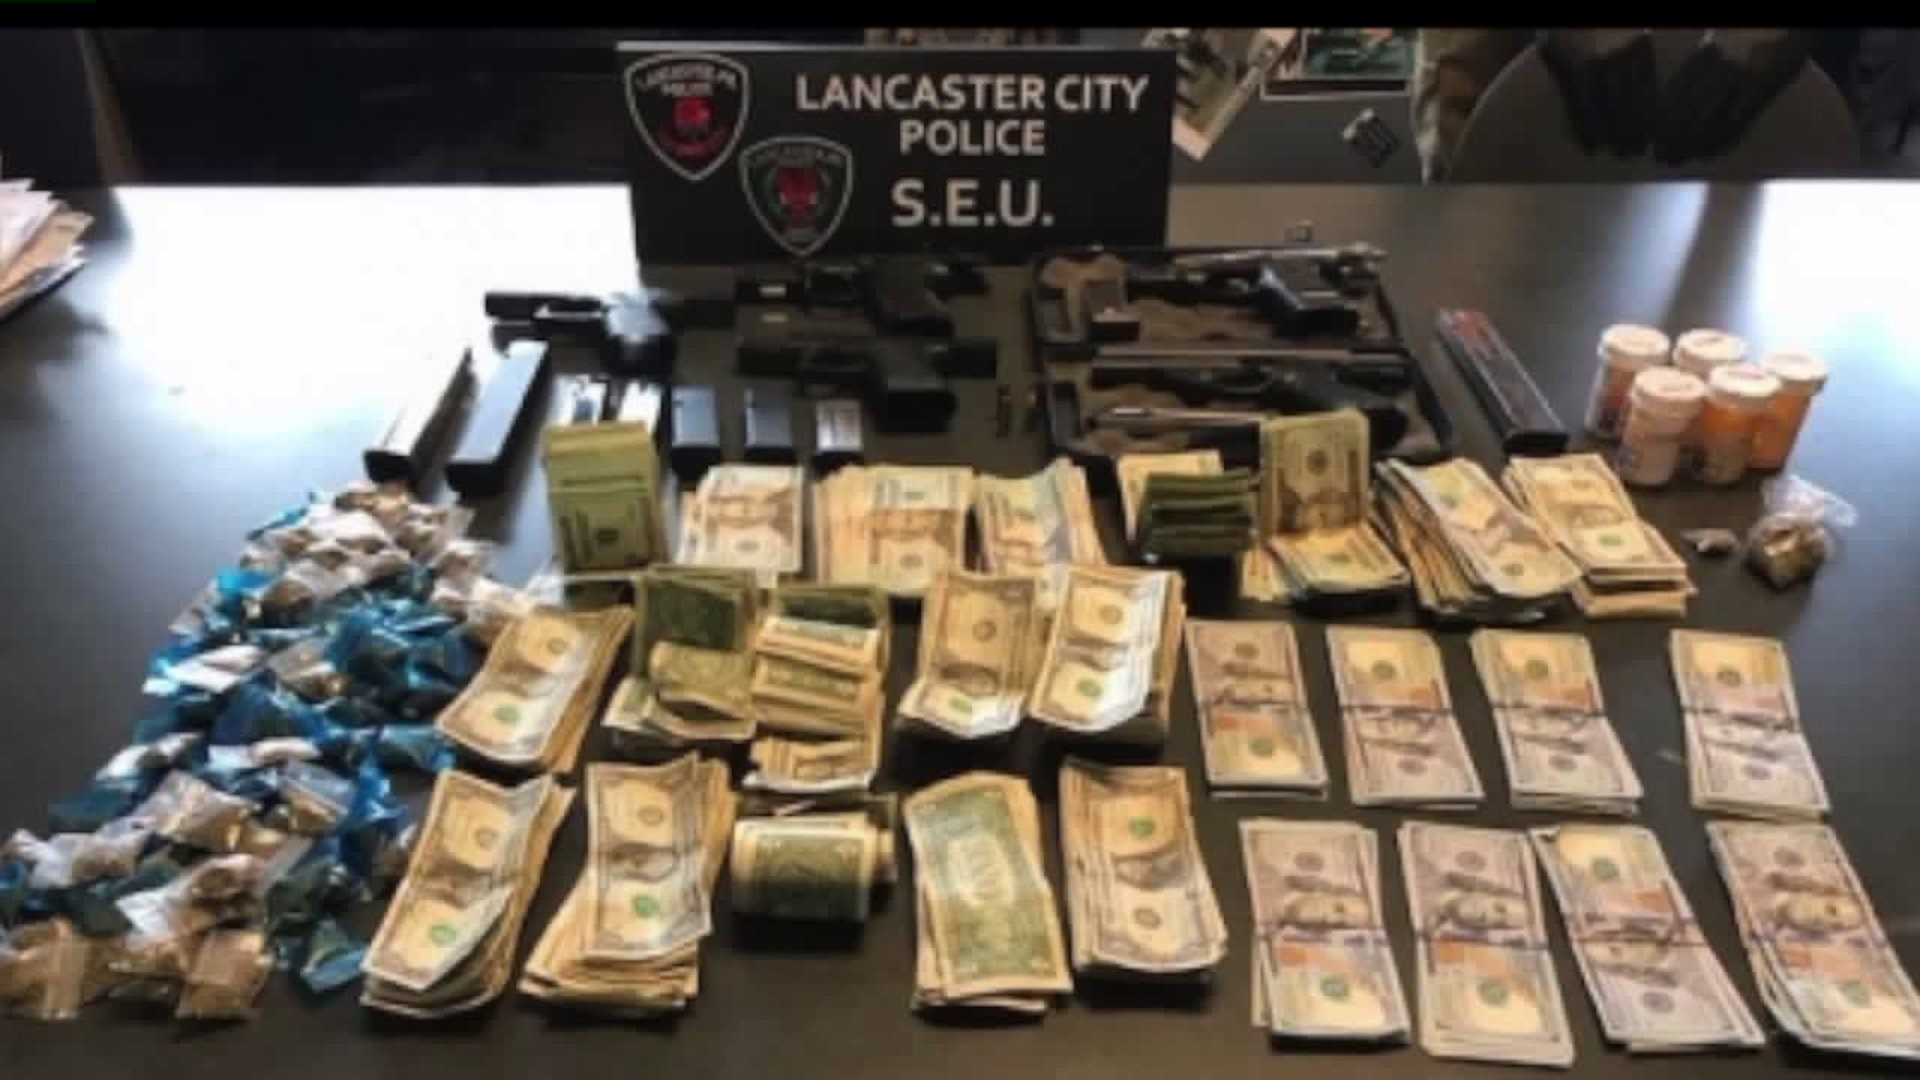 Investigation leads to drugs and guns bust in Lancaster City